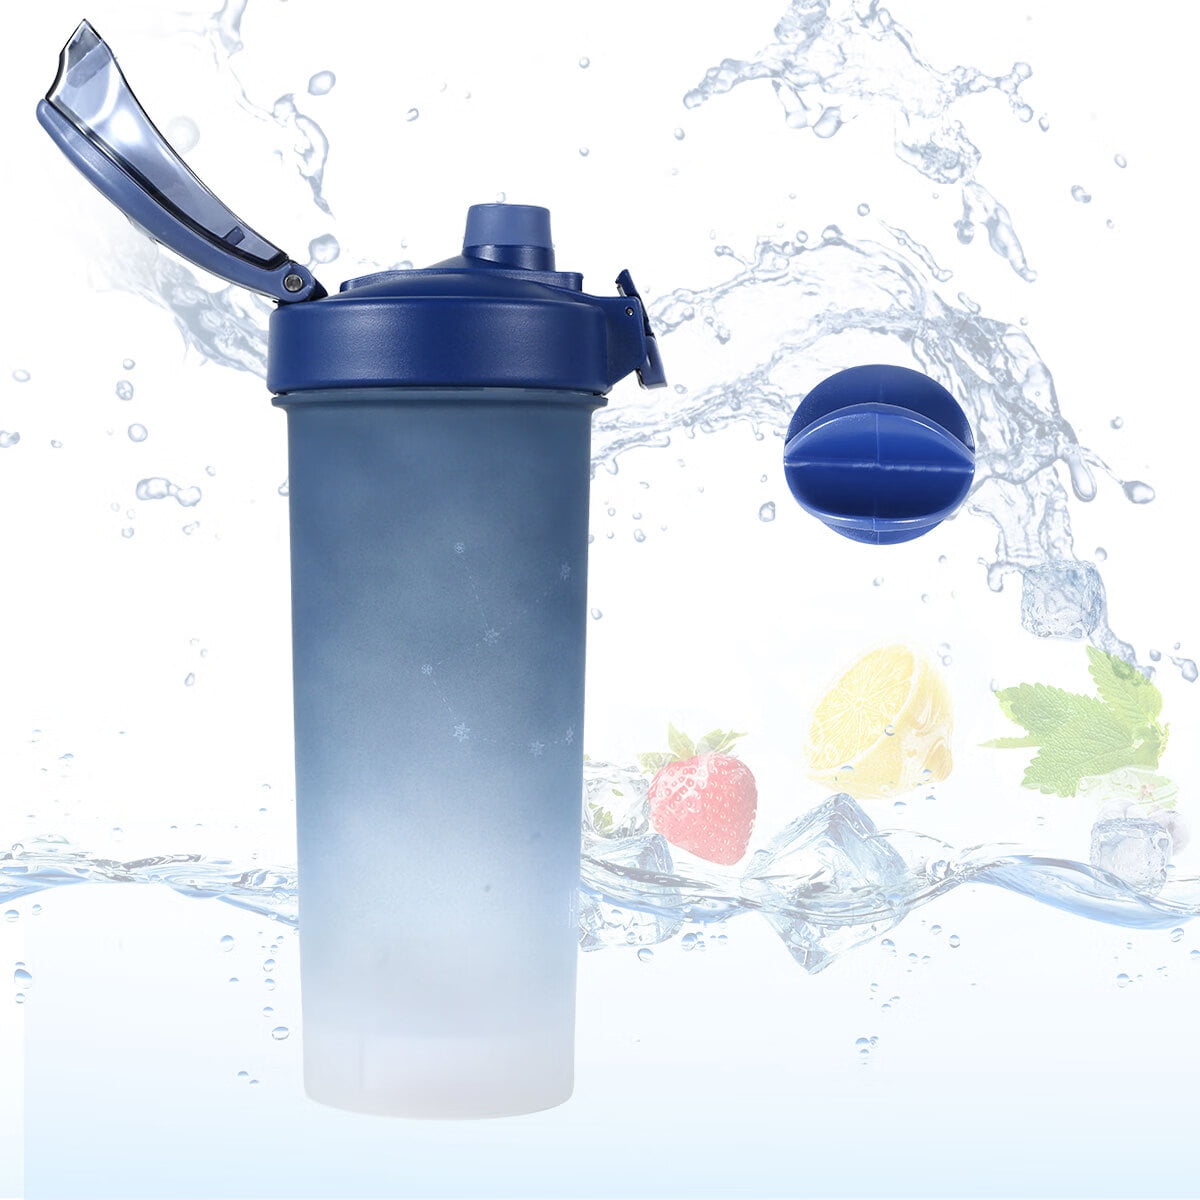 MTFun 800ml Shaker Bottle Plastic and Silicone Shaker Cup with